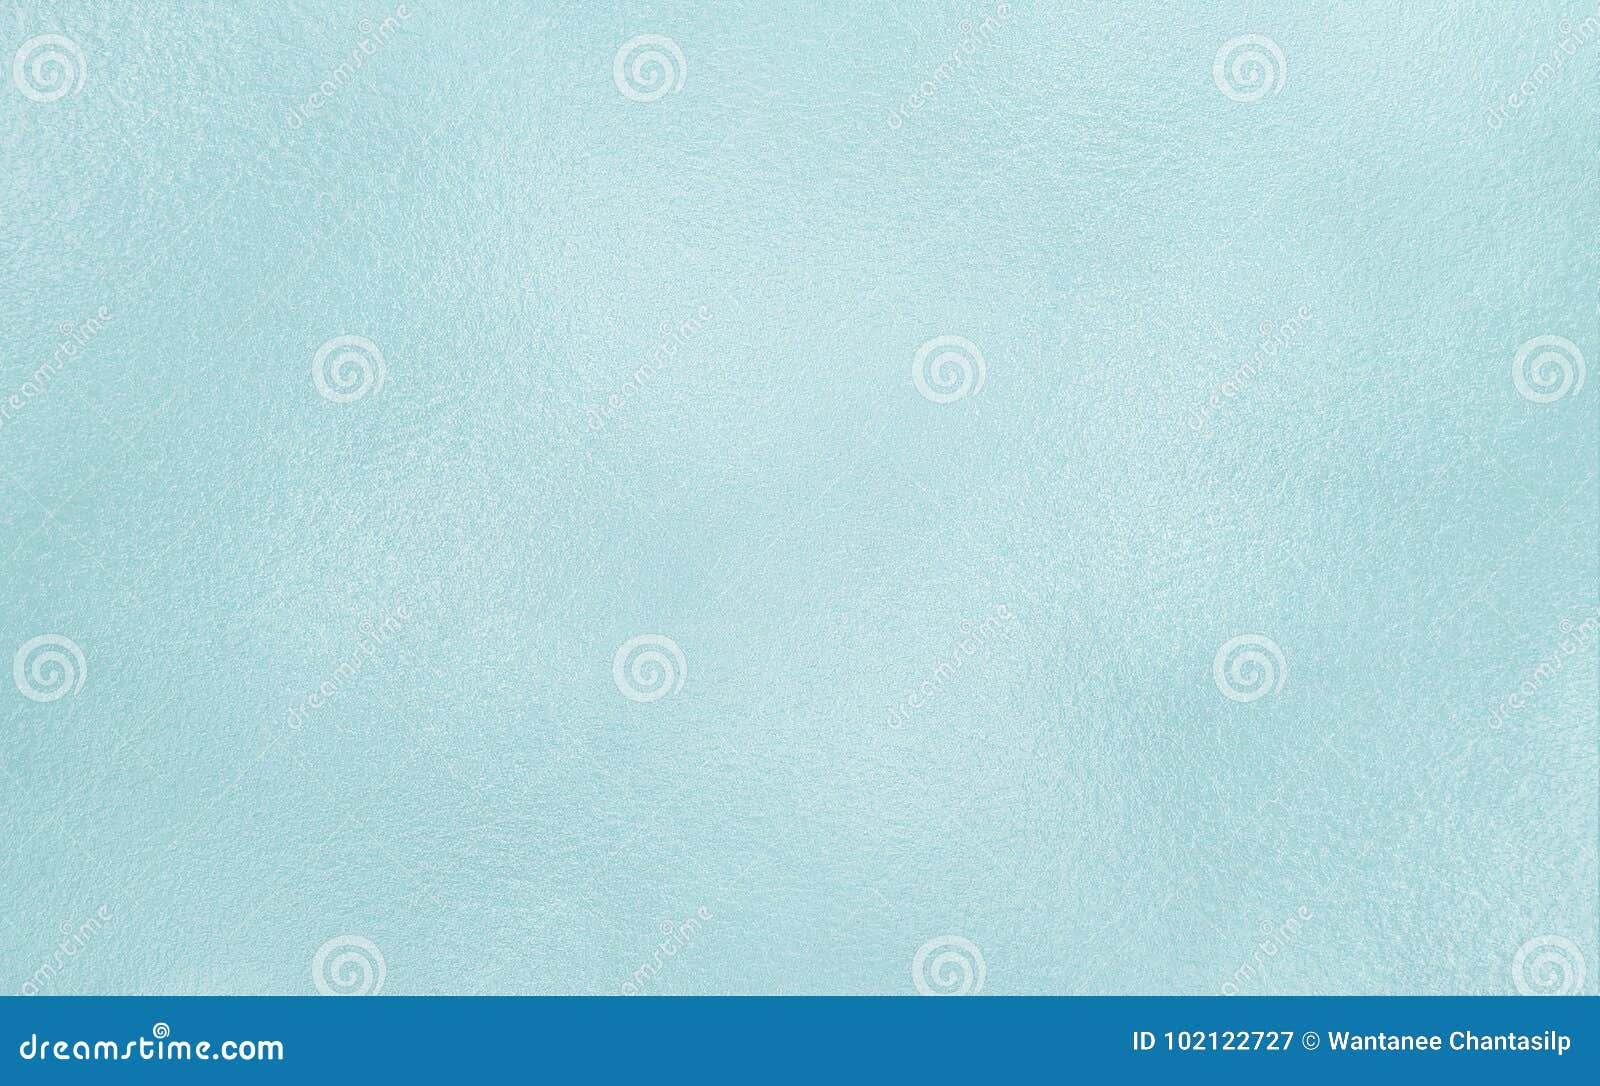 light blue color frosted glass texture background